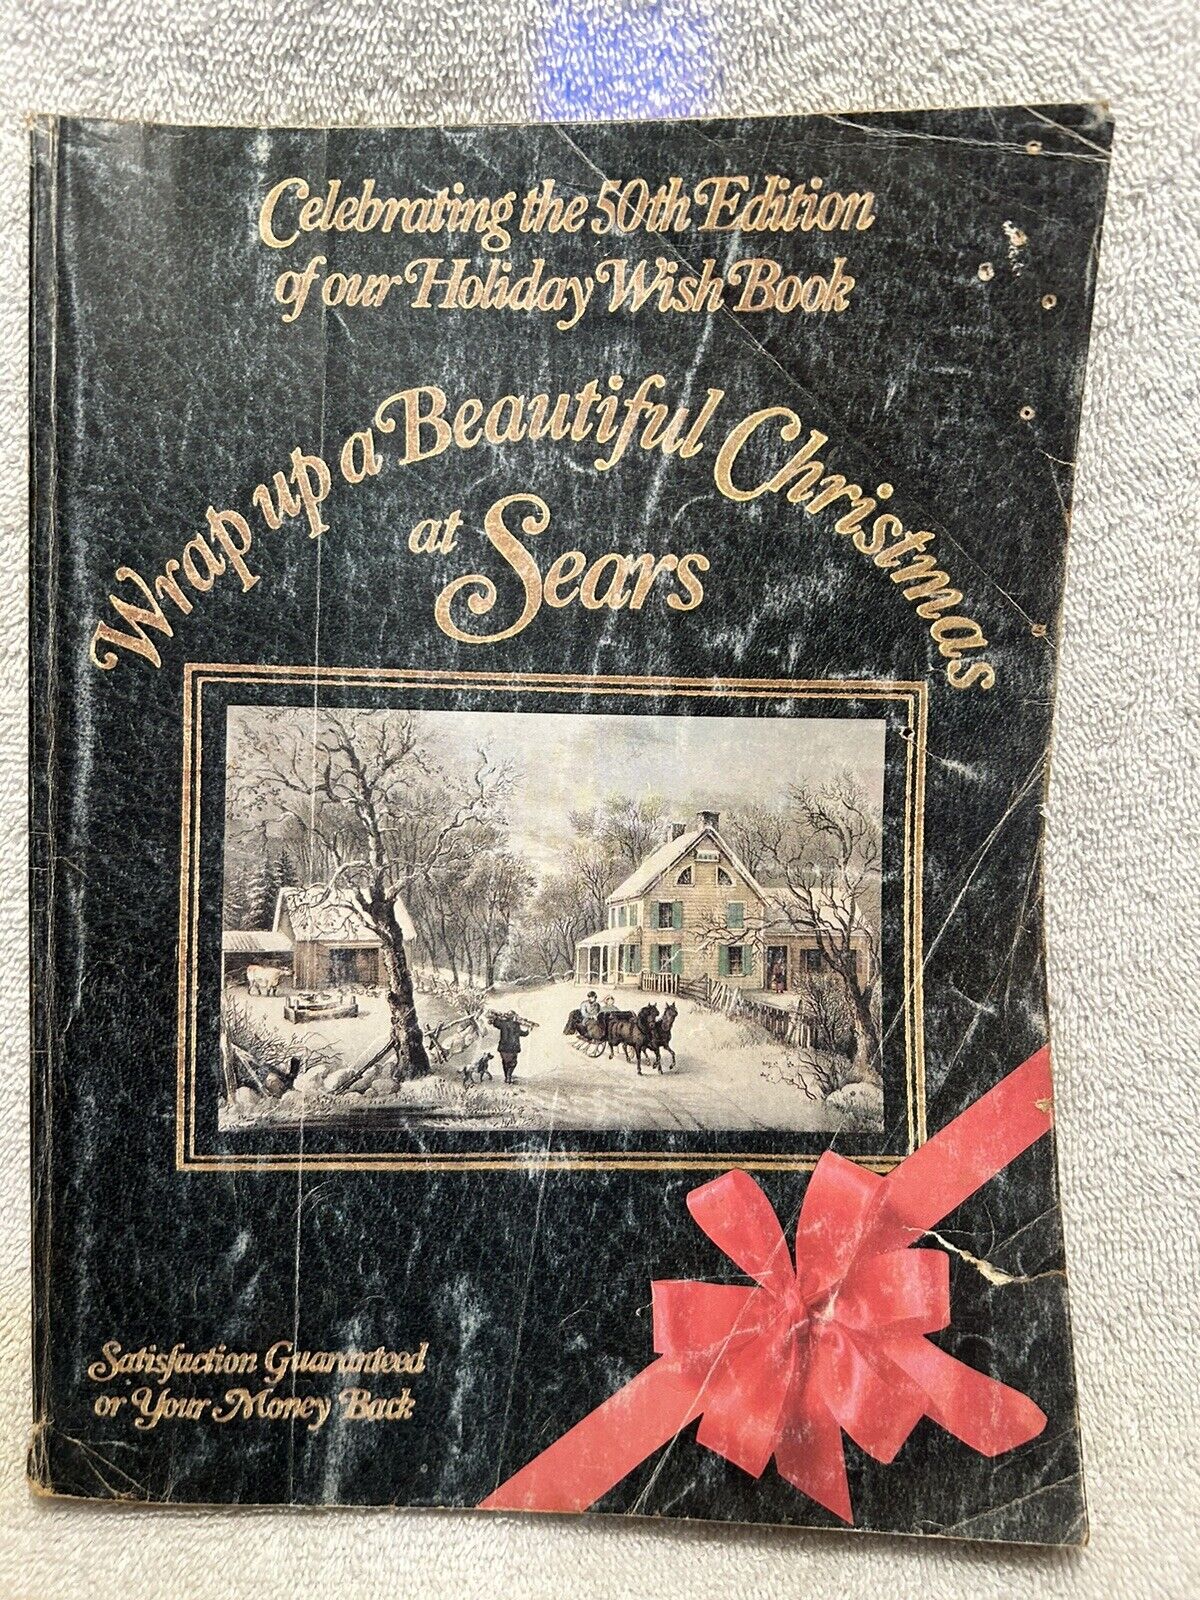 1982 Sears Holiday Wish Book 646 Pages Old Toys & Other Merchandise 50th  Anniv.